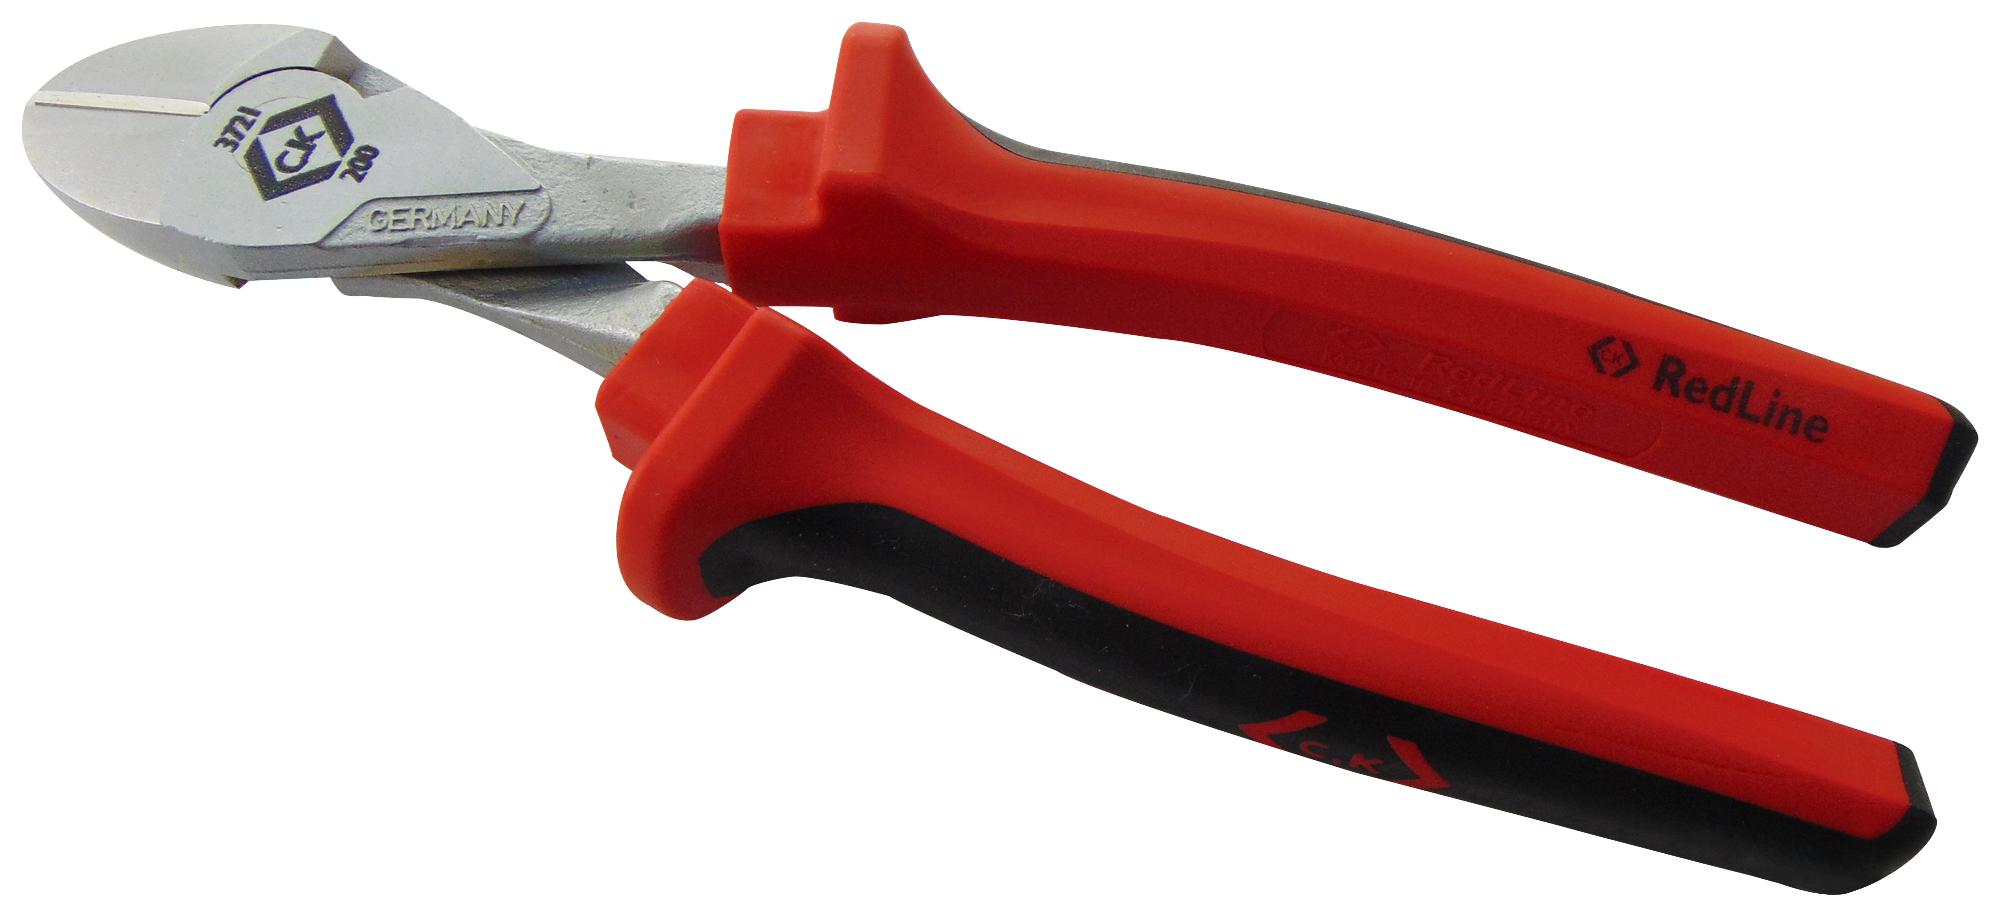 T3721 200 SIDE CUTTER, 2.5MM, 200MM CK TOOLS